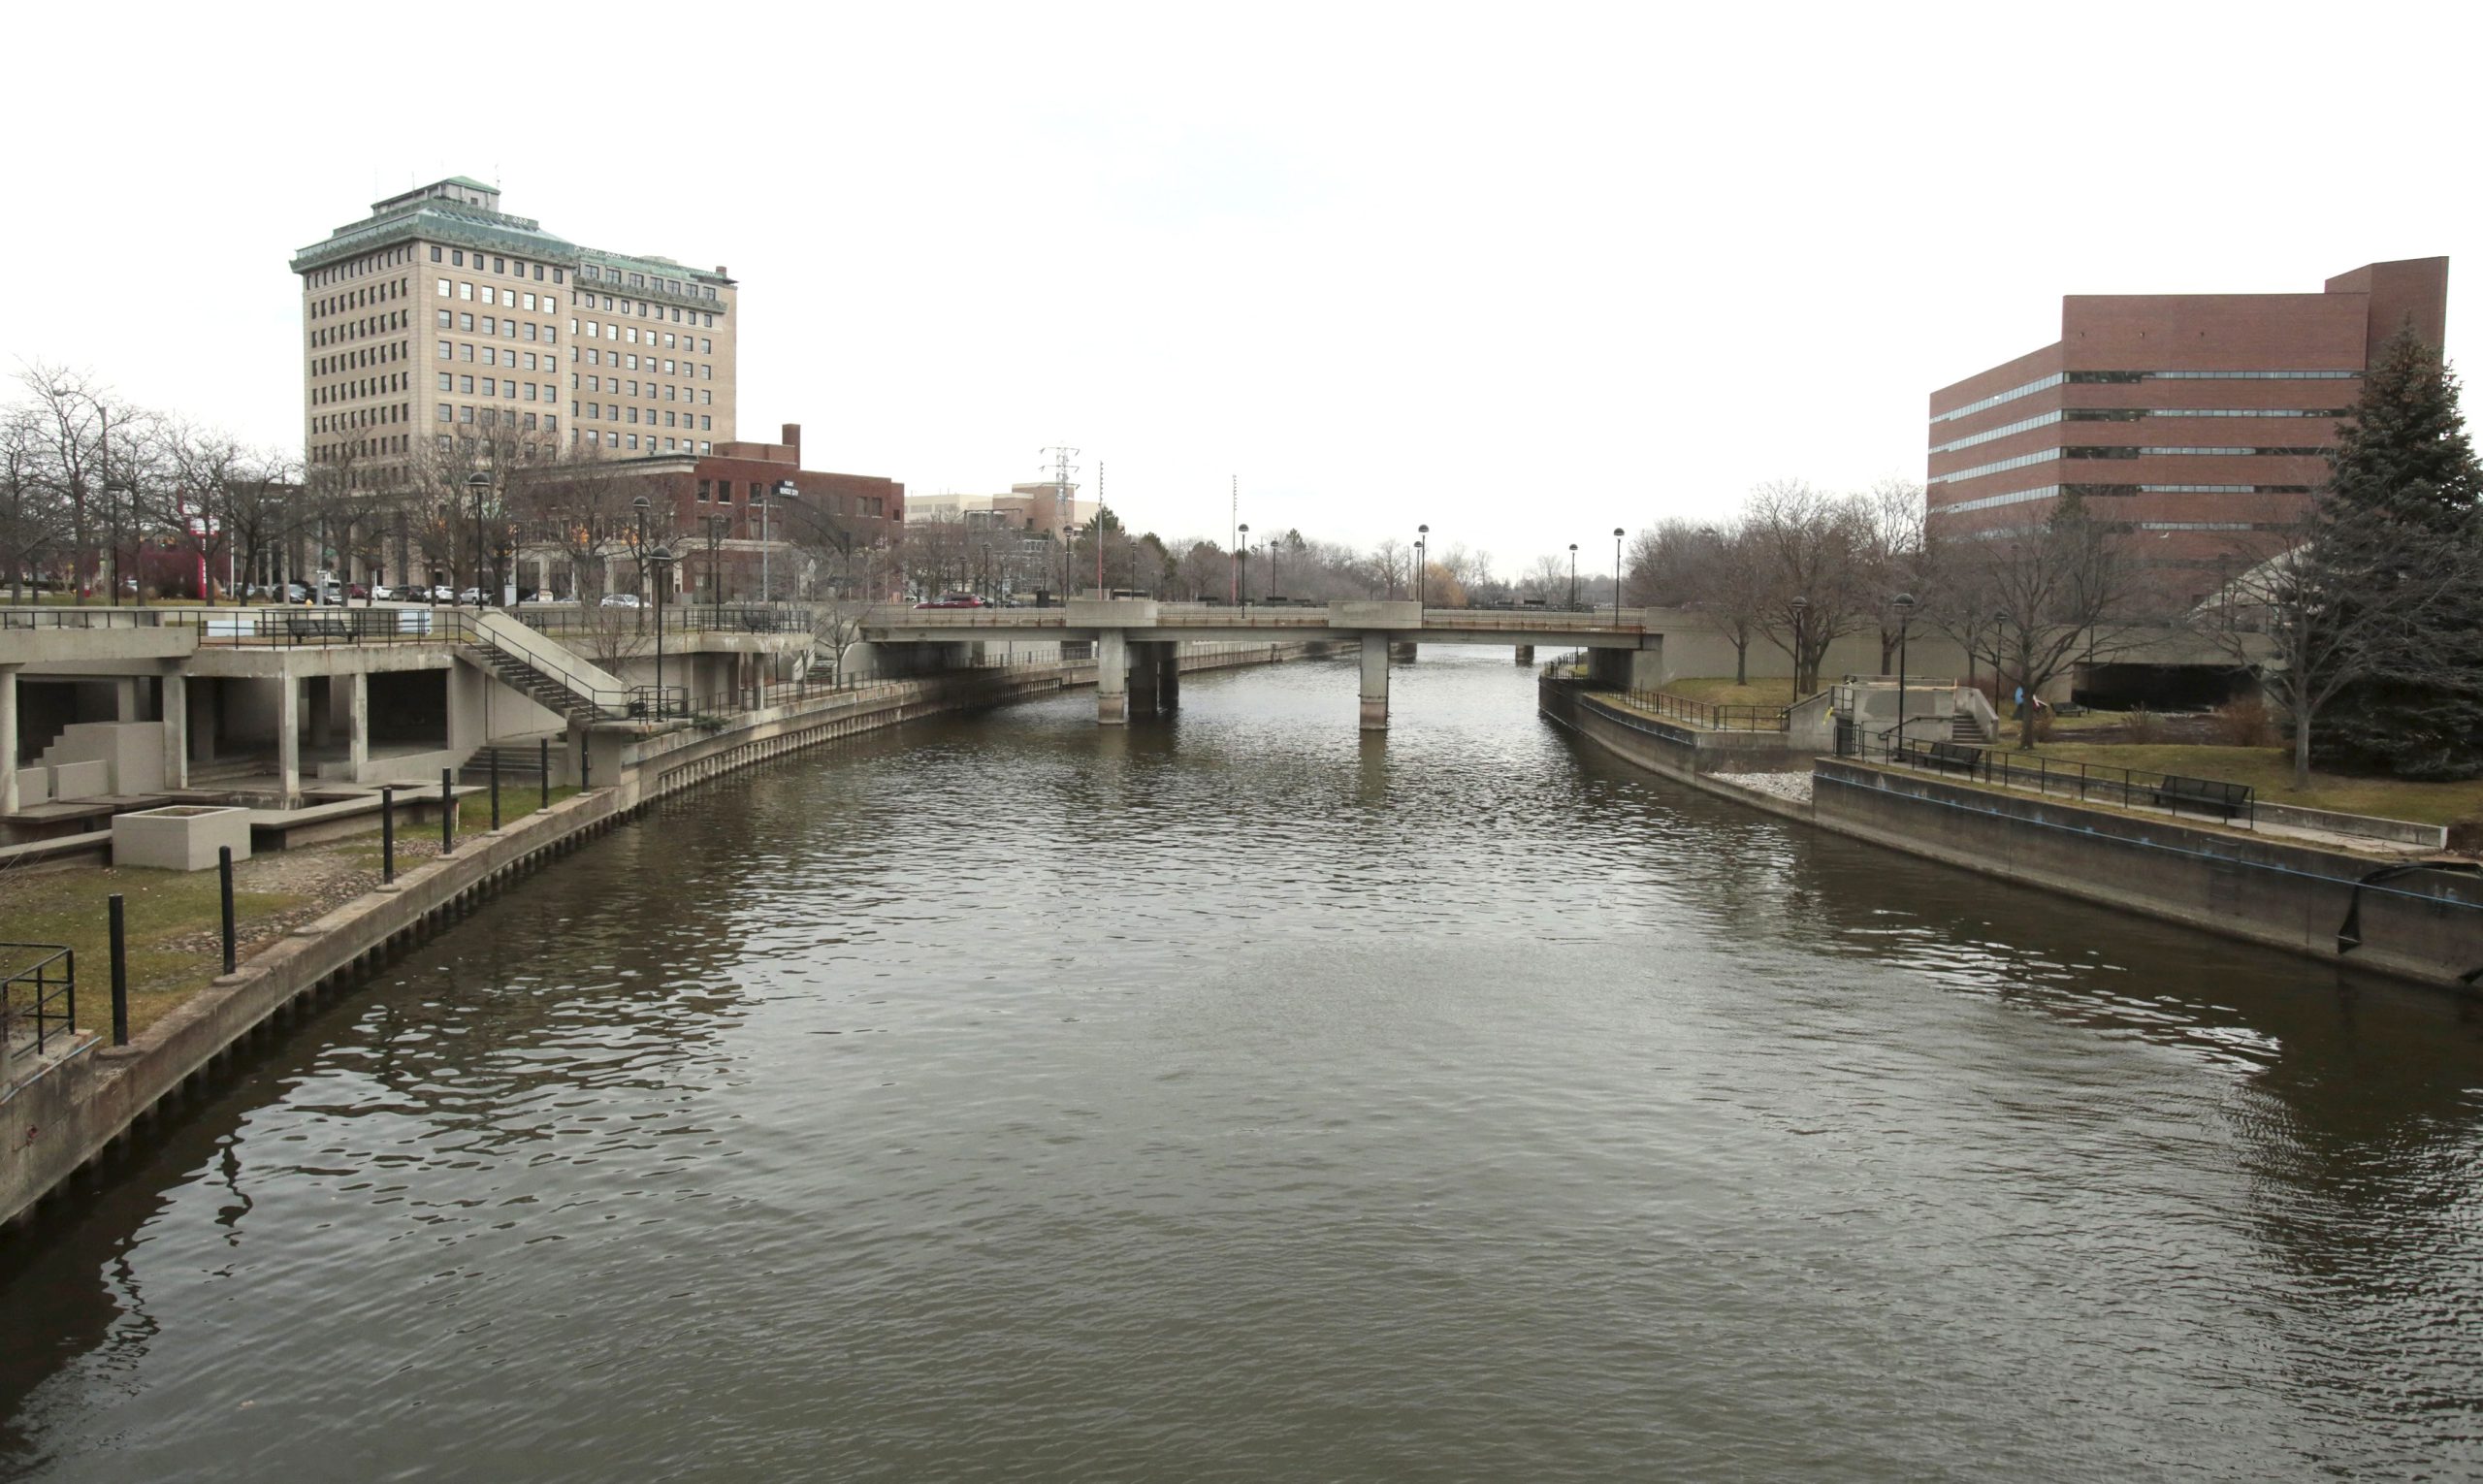 A file photo shows the Flint River in Michigan flowing thru downtown Flint. Advocates and agencies in Philadelphia, St. Louis, and Flint, spoke with OSV News about clean water issues that negatively affect their communities and children long after initial contamination. (OSV News photo/Rebecca Cook, Reuters)